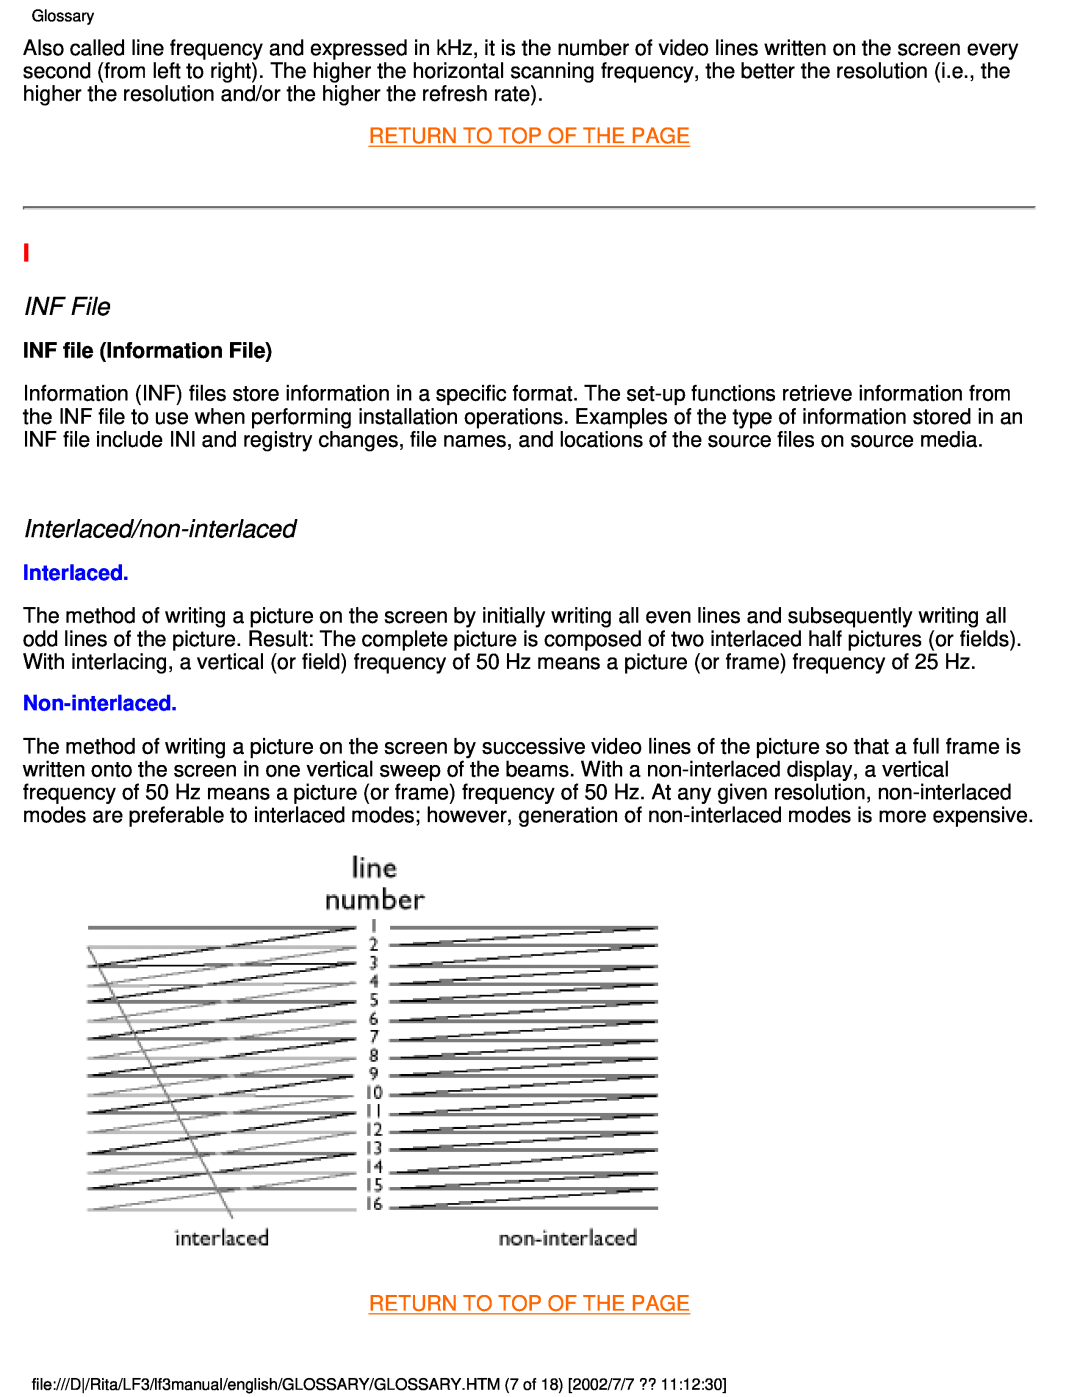 Philips 107T41 INF File, Interlaced/non-interlaced, Return To Top Of The Page, INF file Information File, Non-interlaced 